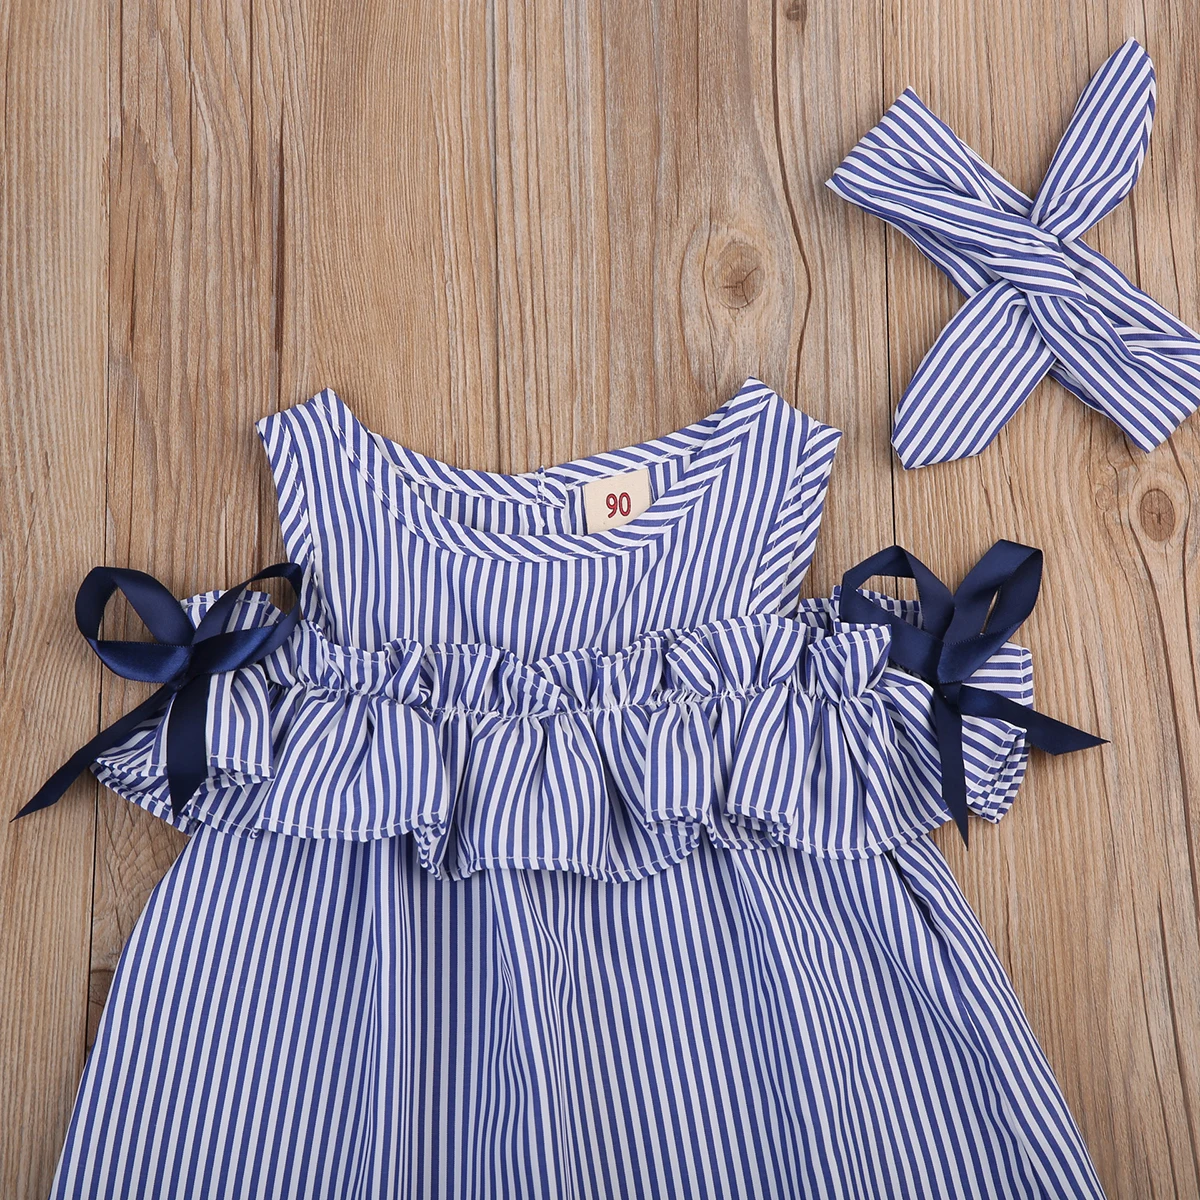 Hot New Summer Dress Toddler Kids Baby Girls Lovely Birthday Clothes Blue Striped Off-shoulder Ruffles Party Gown Dresses